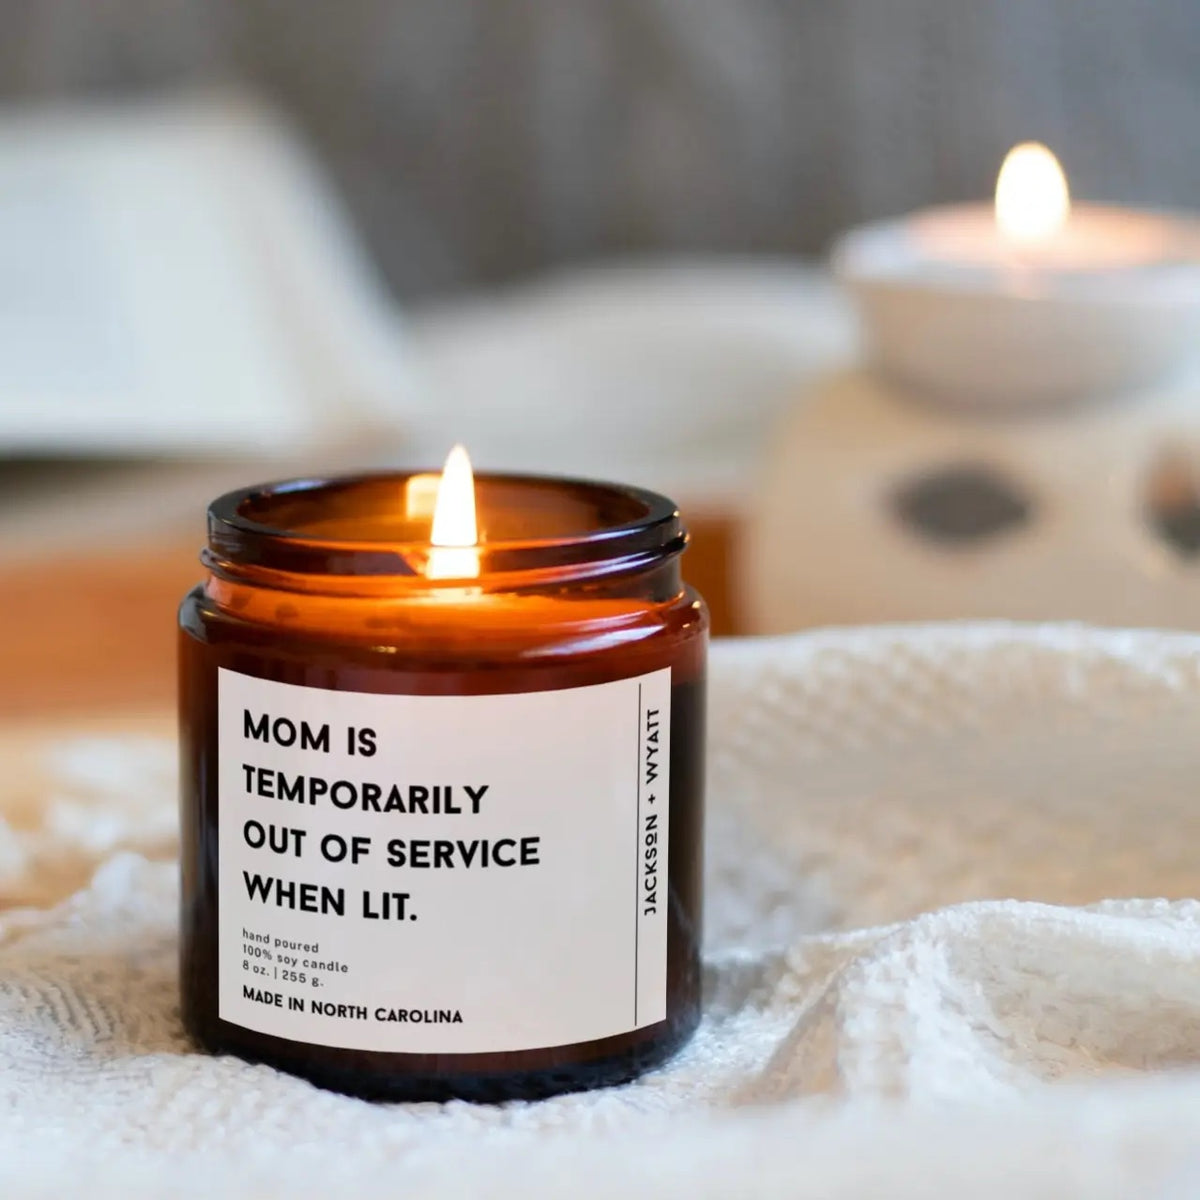 Mom, Mommy, Mama, Mother, Funny Candles for Moms, 9 ounces